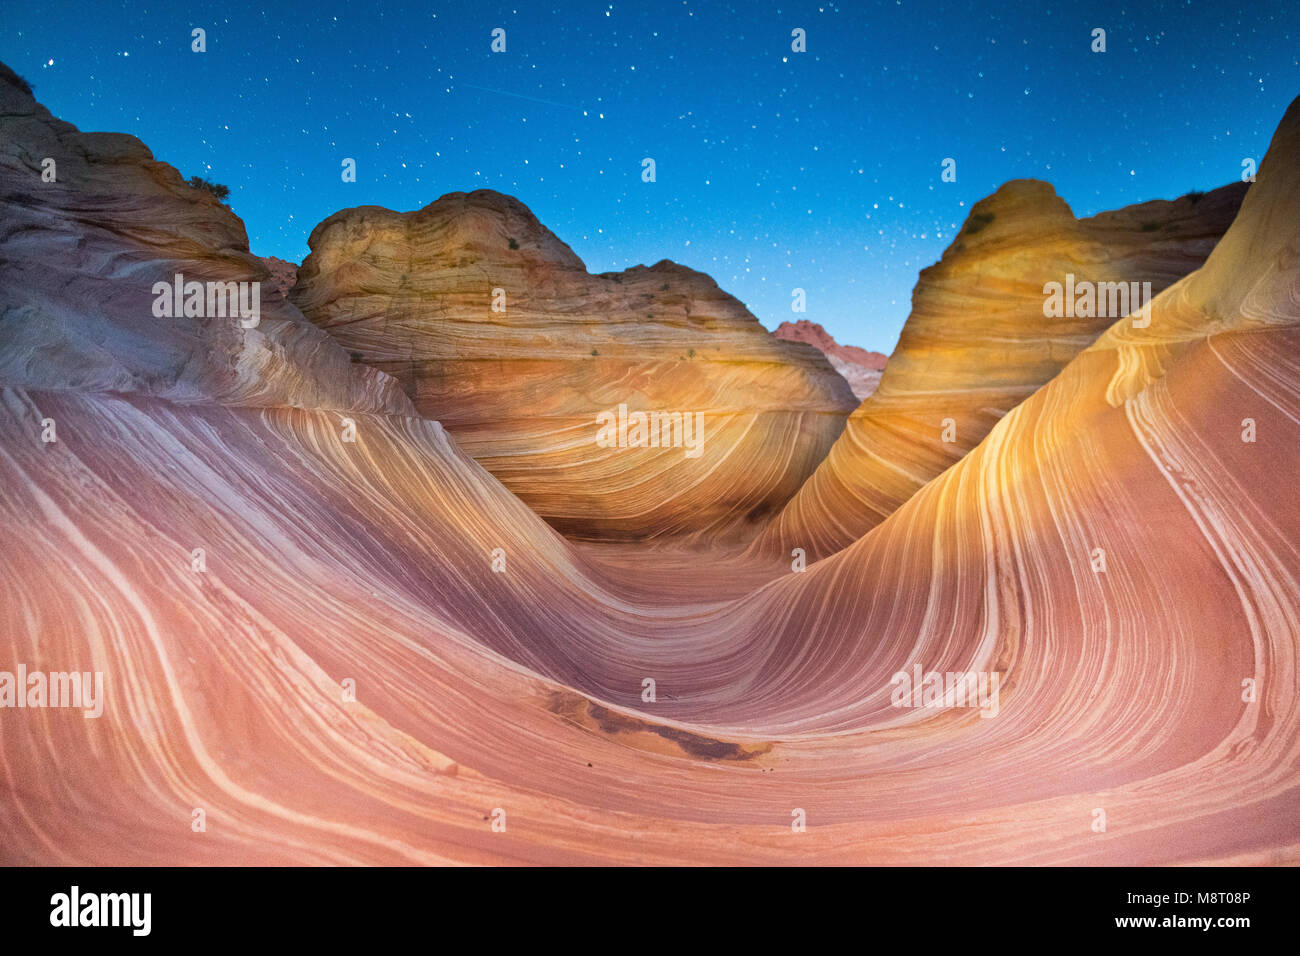 A shooting star passes over the Wave sandstone rock formation, located in Coyote Buttes North, Paria Canyon, Vermillion Cliffs Wilderness. Stock Photo